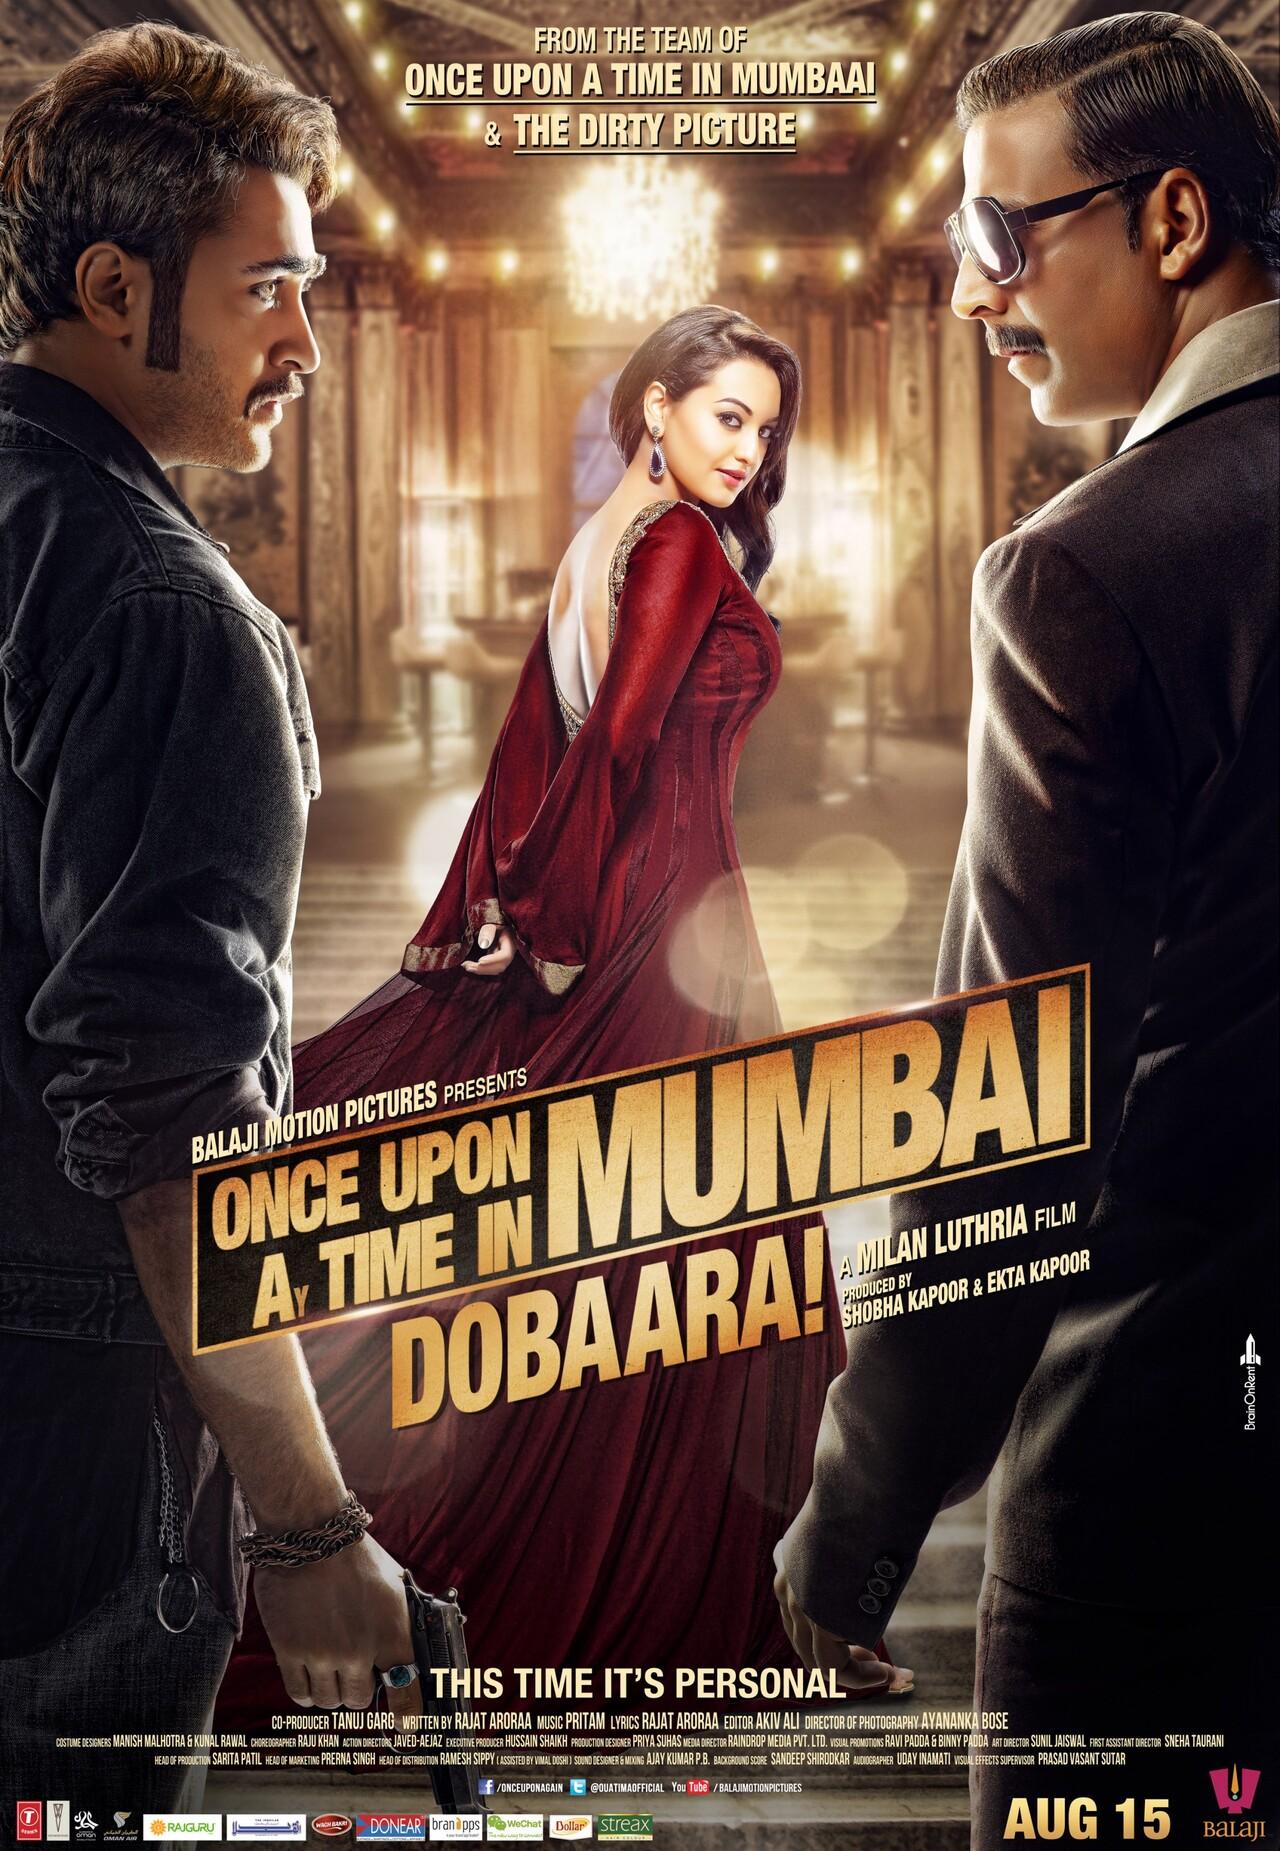 Once Upon ay Time in Mumbai Dobaara! (2013)
Starring Imran Khan, Sonakshi Sinha, and Akshay Kumar, the film is a sequel to the hit Once Upon A Time In Mumbai
 
 